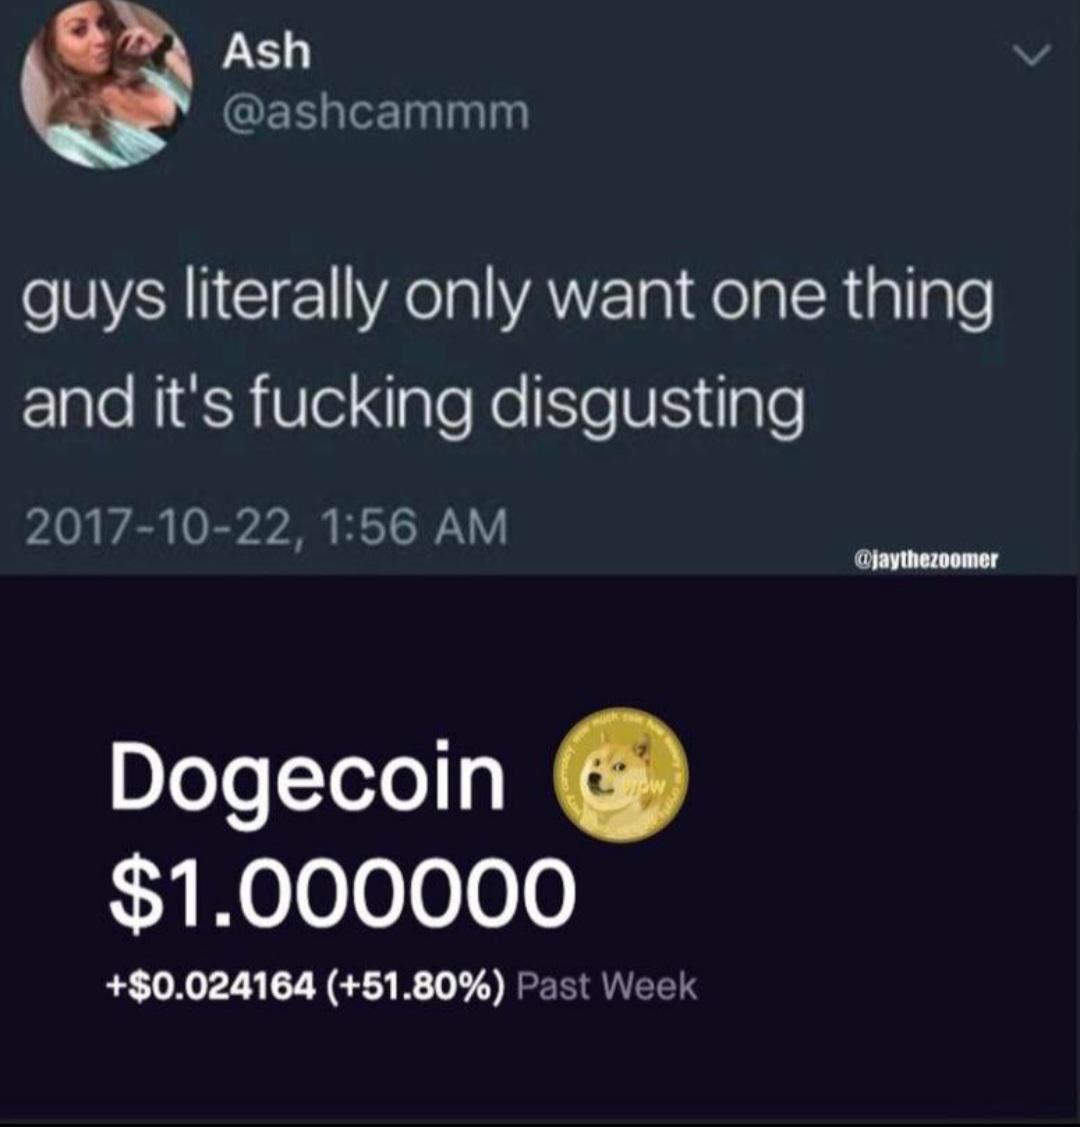 funny pictures - atmosphere - Ash guys literally only want one thing and it's fucking disgusting , Dogecoin $1.000000 $0.024164 51.80% Past Week